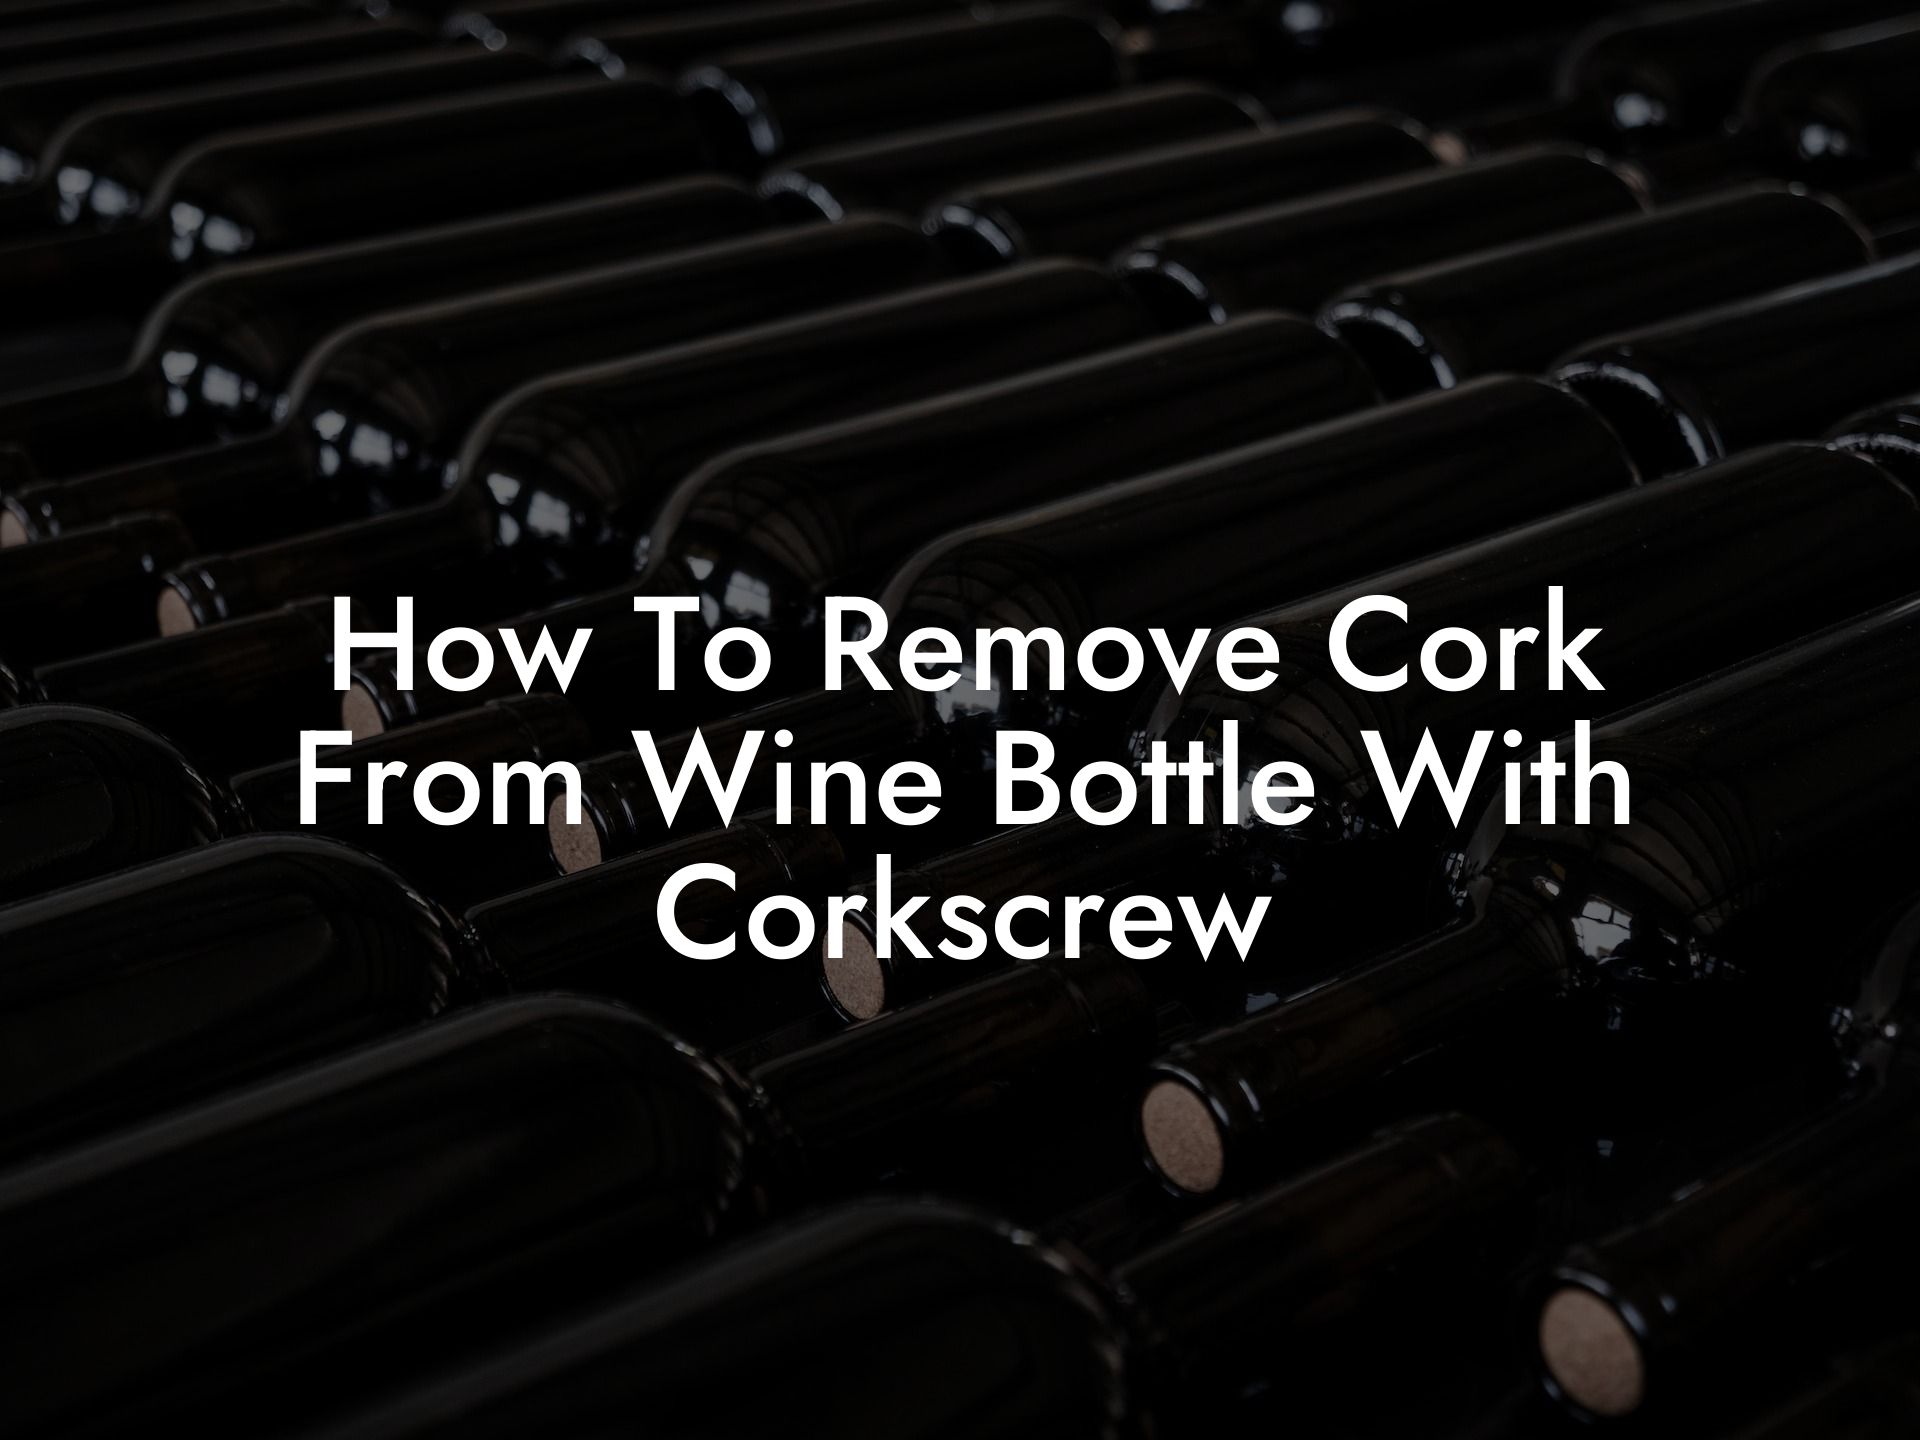 How To Remove Cork From Wine Bottle With Corkscrew